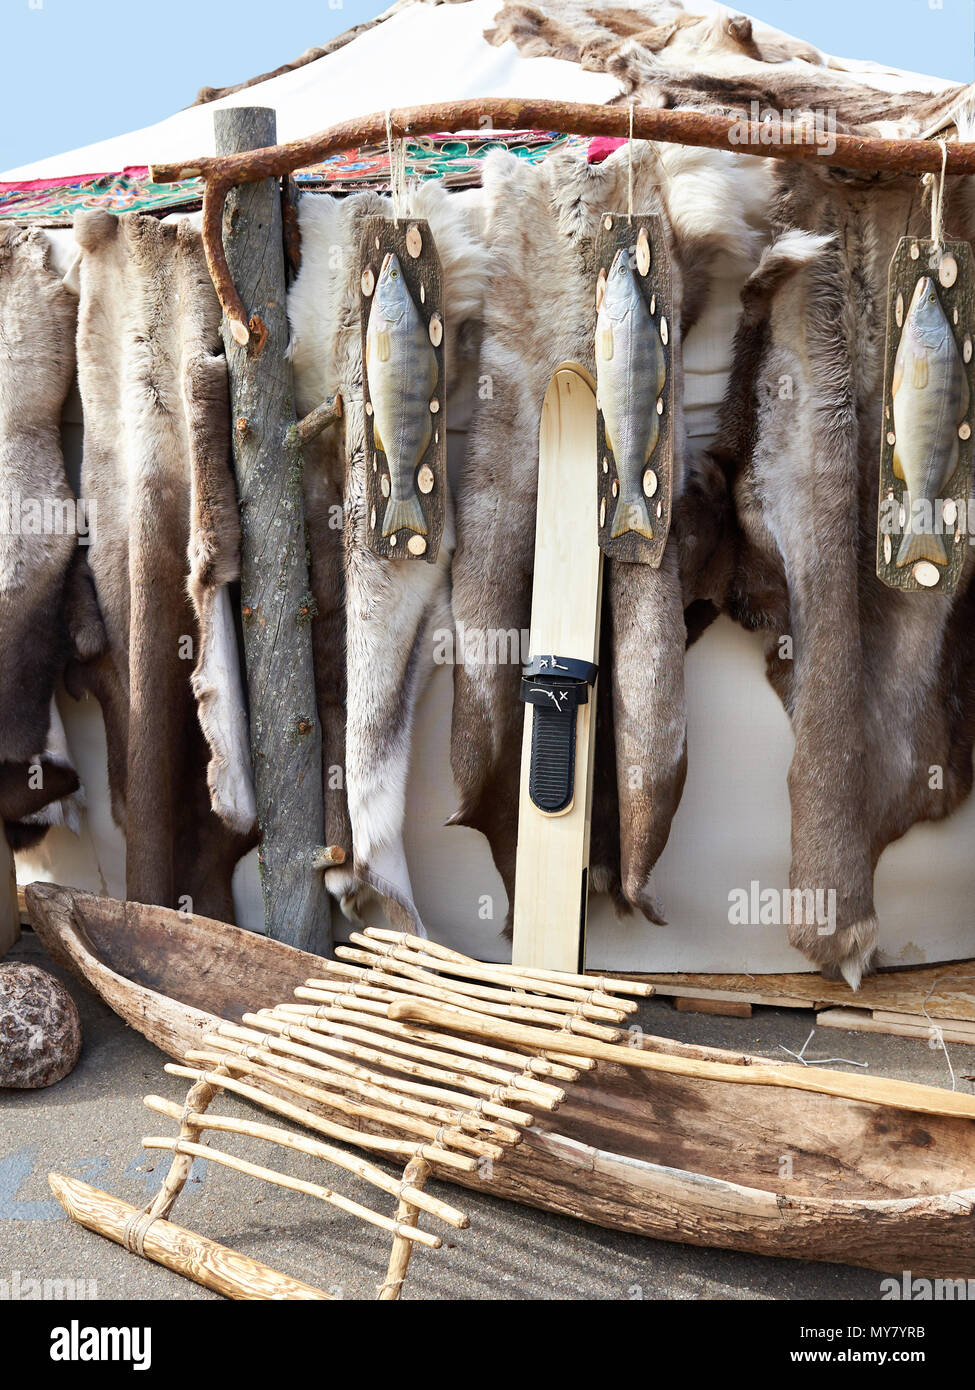 Hunter skis, wooden boat and reindeer skins on a yurt Stock Photo